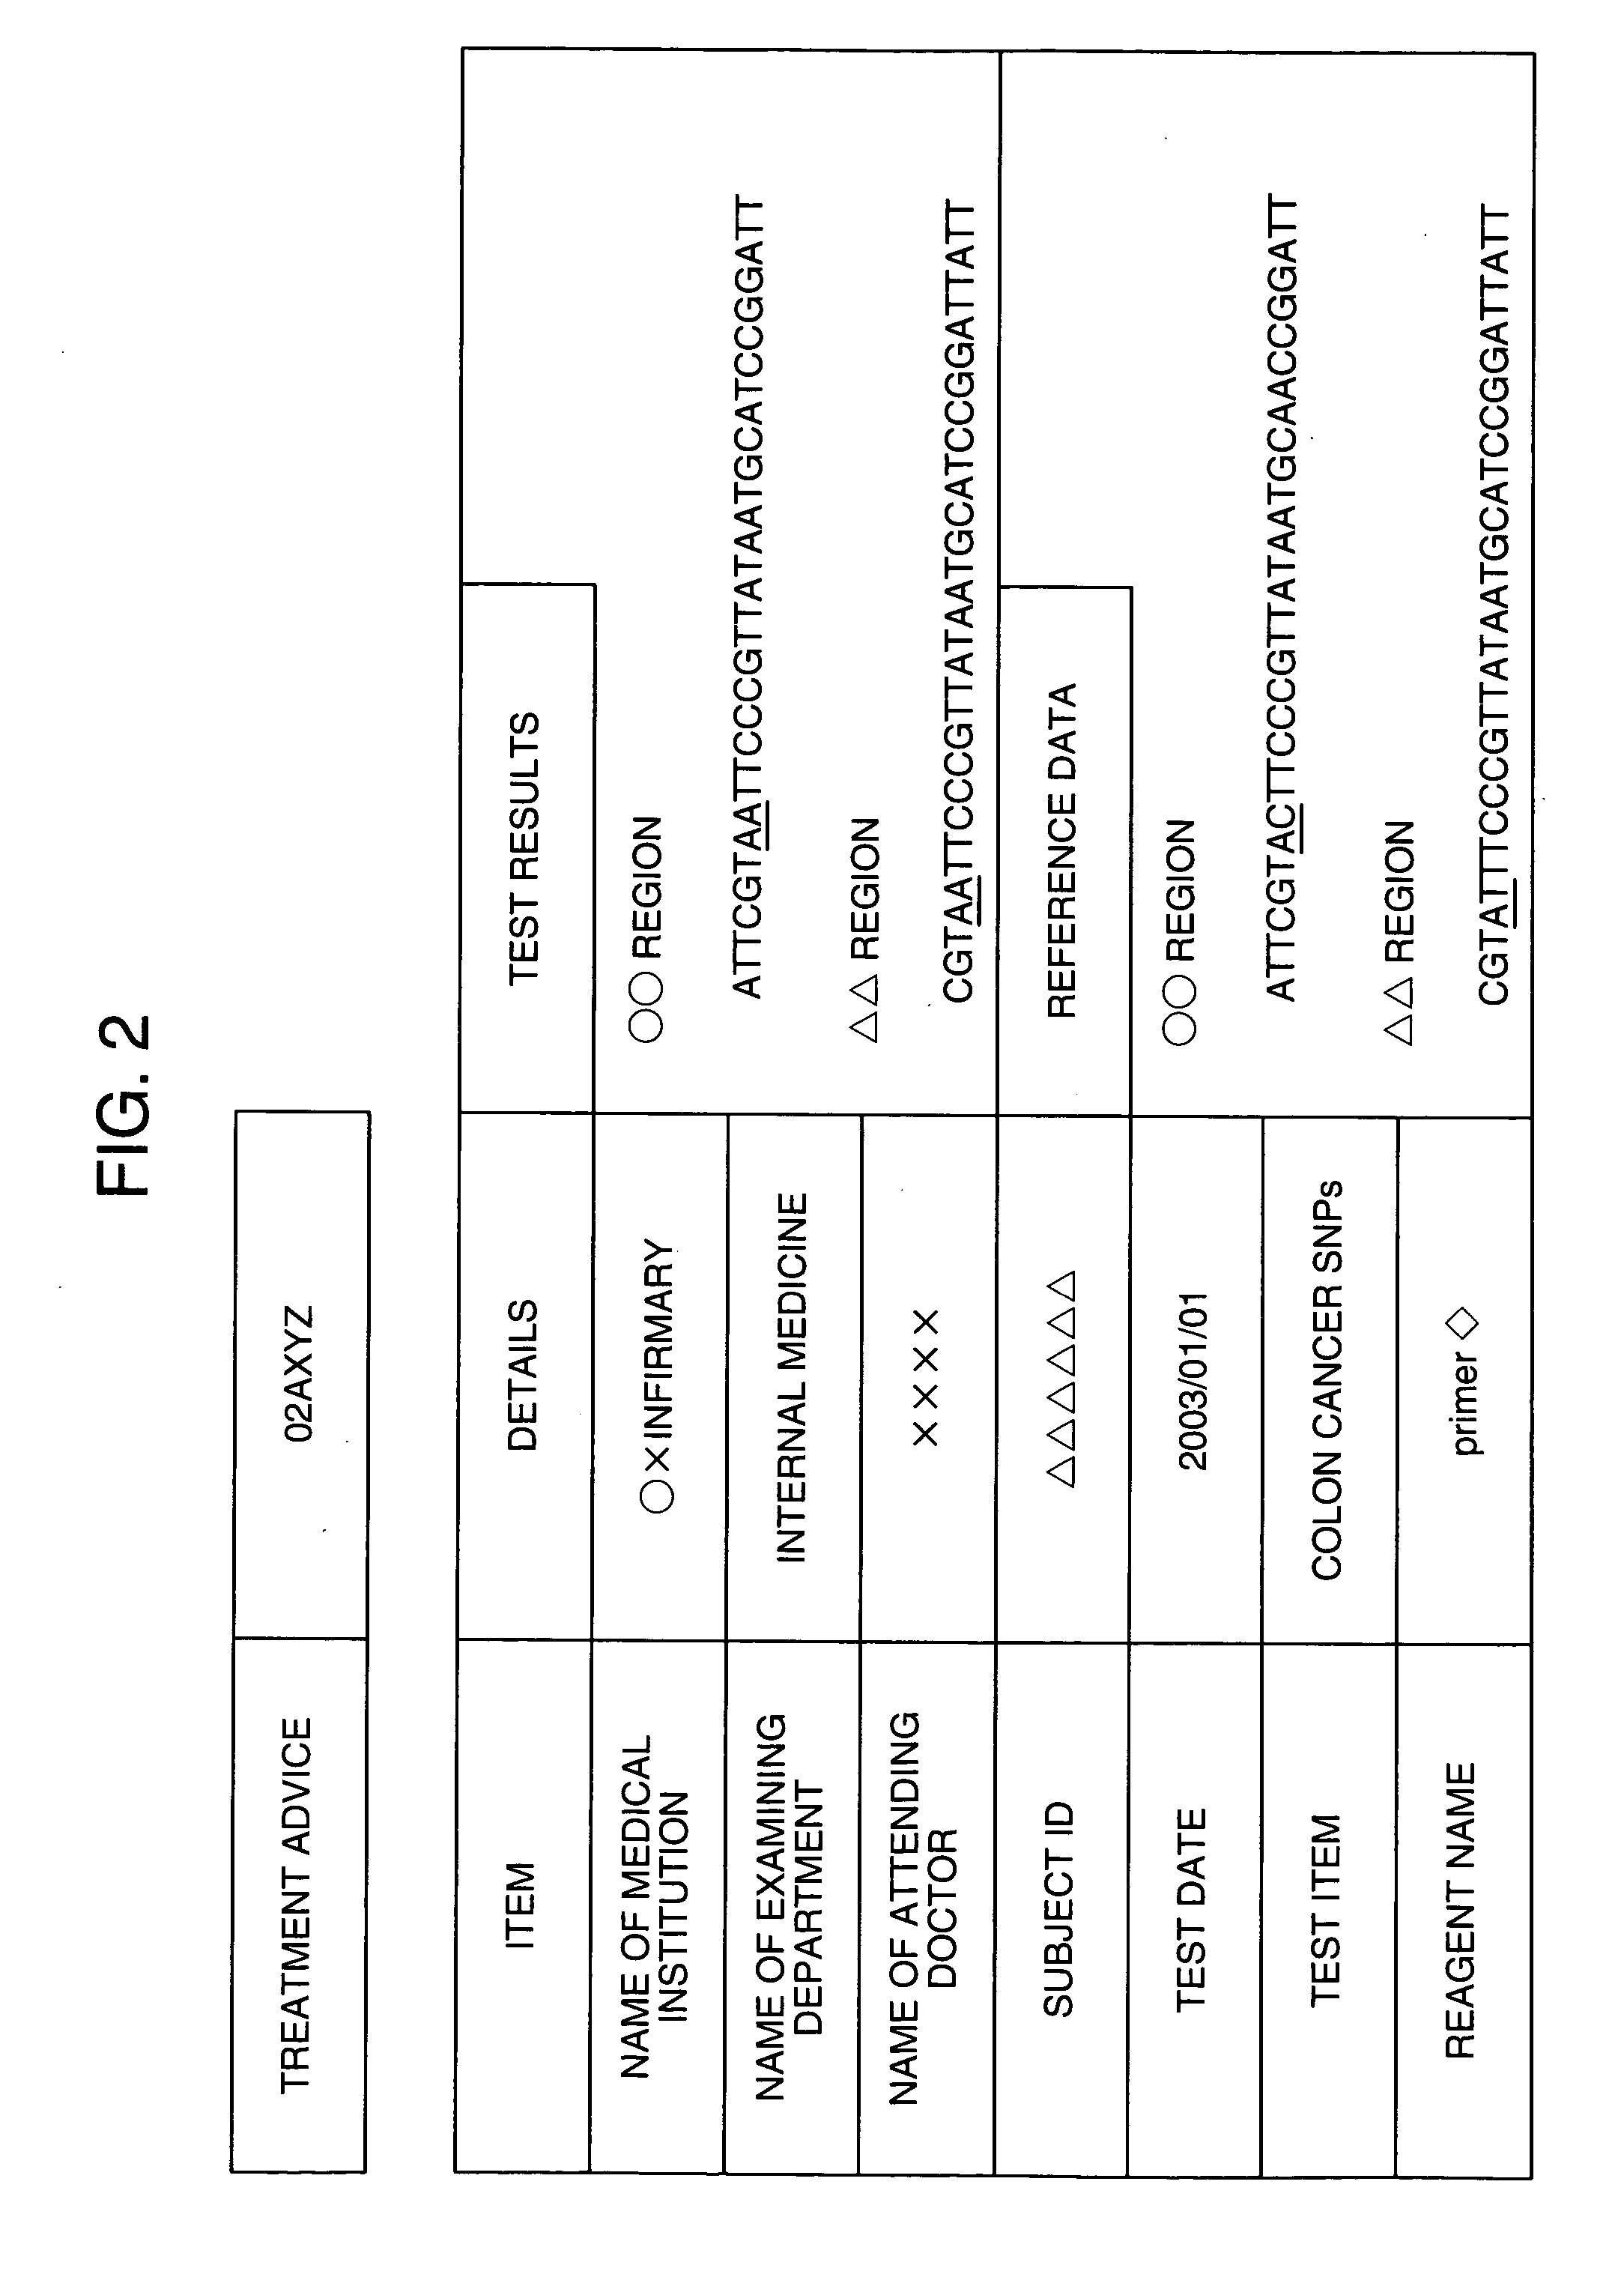 Distributed testing apparatus and host testing apparatus